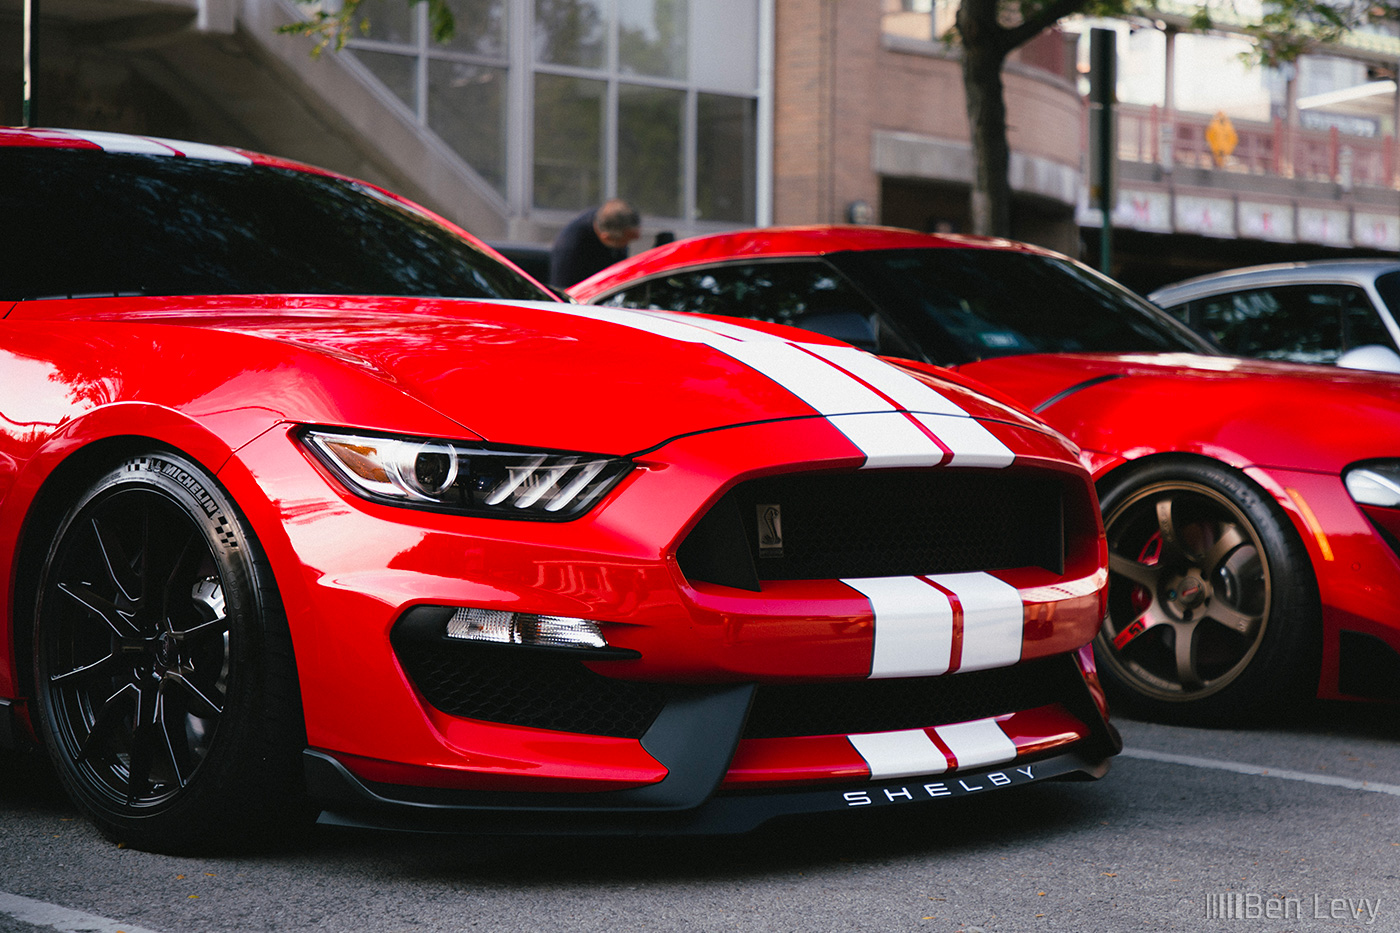 Front Bumper of Red Mustang GT 350